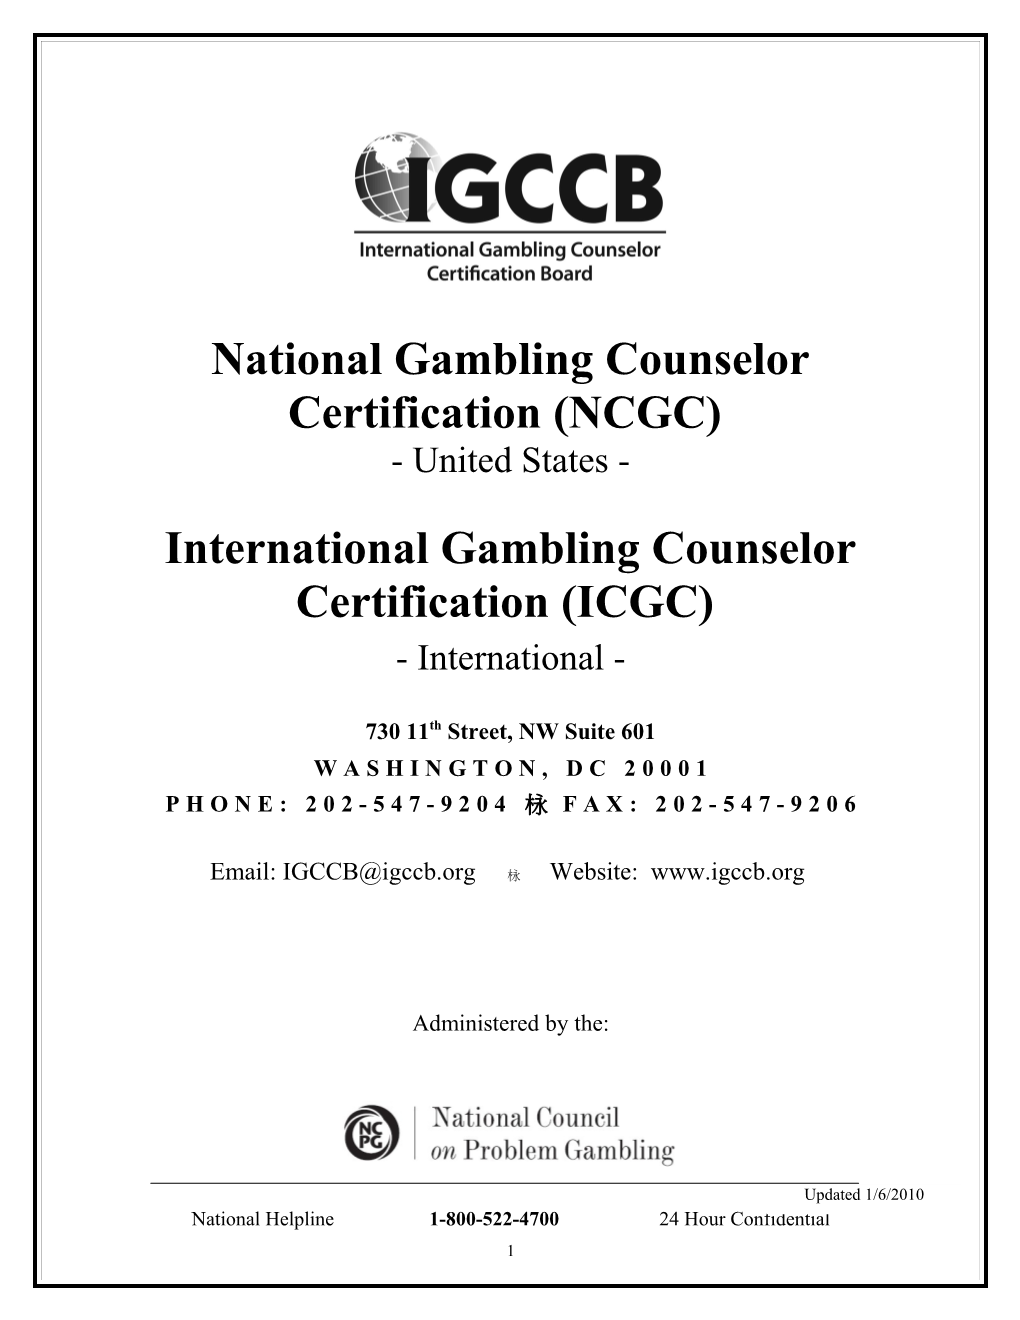 The Certification Board Has Authorized the National Council on Problem Gambling to Offer